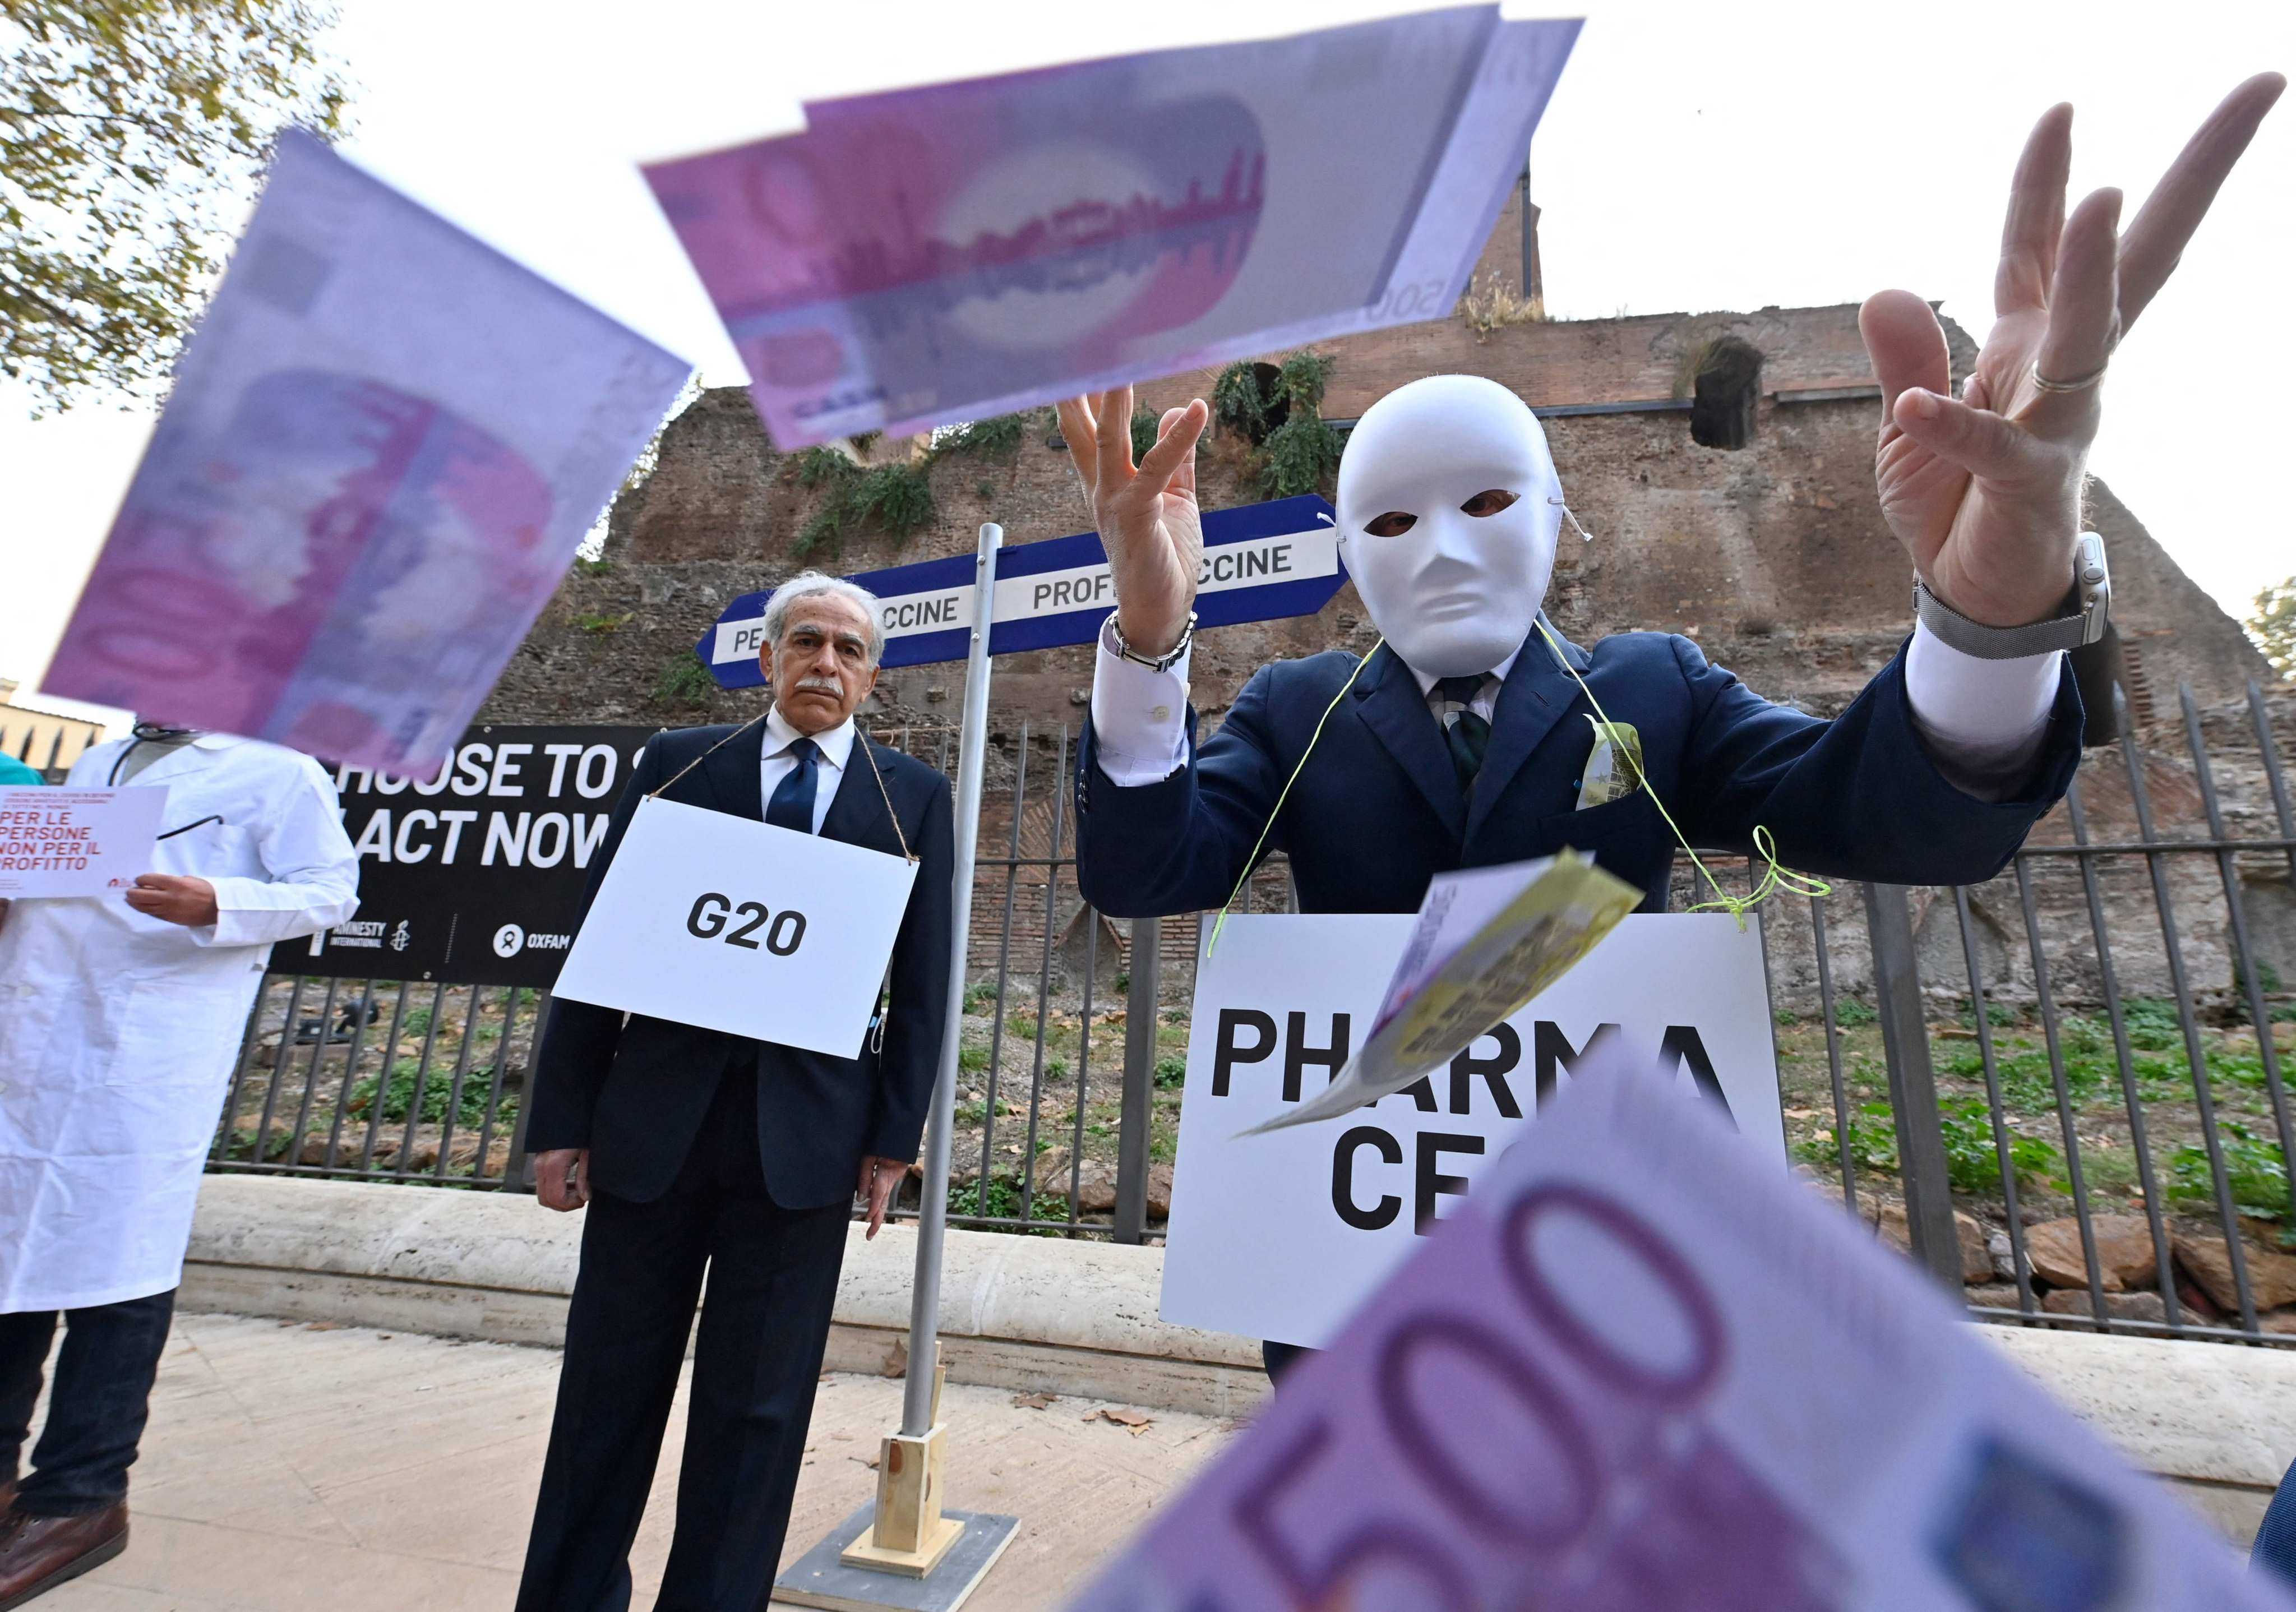 Activists from Amnesty international, Emergency and Oxfam stage a flashmob to denounce the inequality of vaccine access on October 29, 2021, on the eve of the G20 summit, at Piazza Vittorio in Rome. Photo: AFP